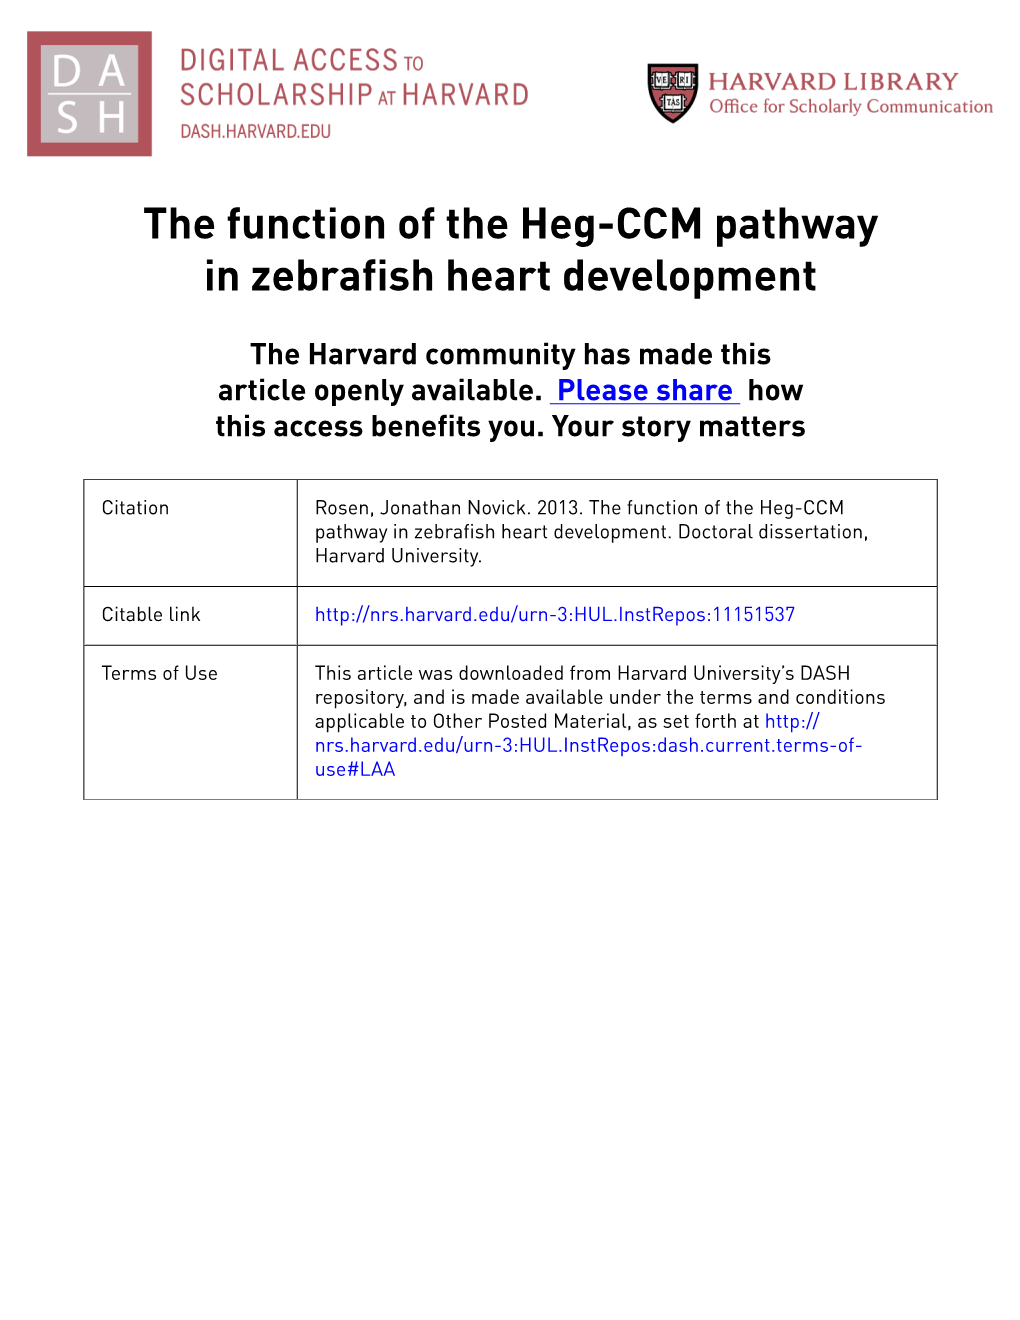 The Function of the Heg-CCM Pathway in Zebrafish Heart Development